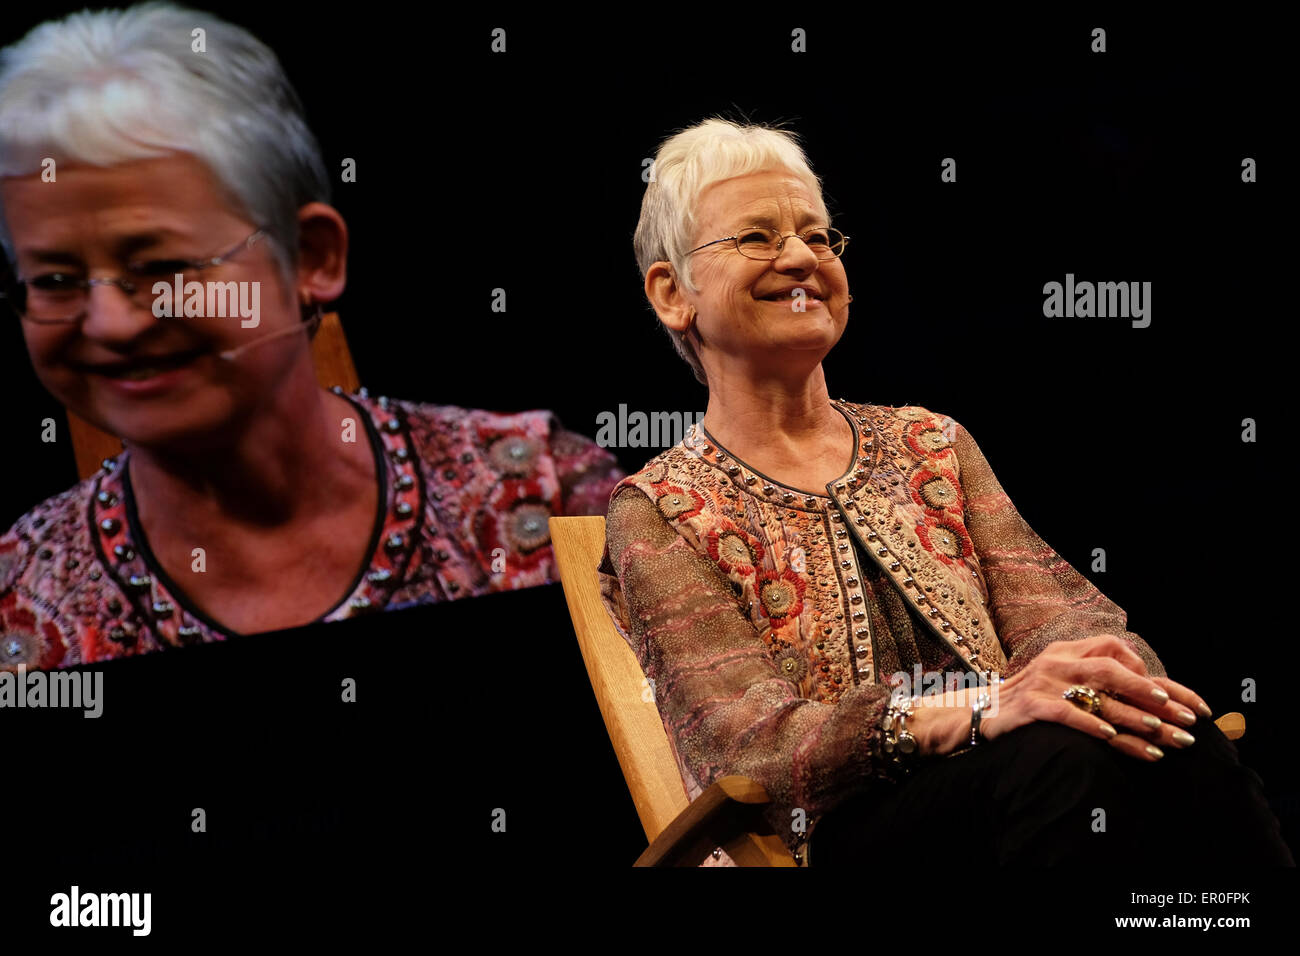 Hay Festival Powys, Wales, UK May 2015  Bestselling author Jacqueline Wilson talks to her huge following of young fans and readers about her writing career and latest books 'The Butterfly Club' and 'Opal Plumstead' Stock Photo